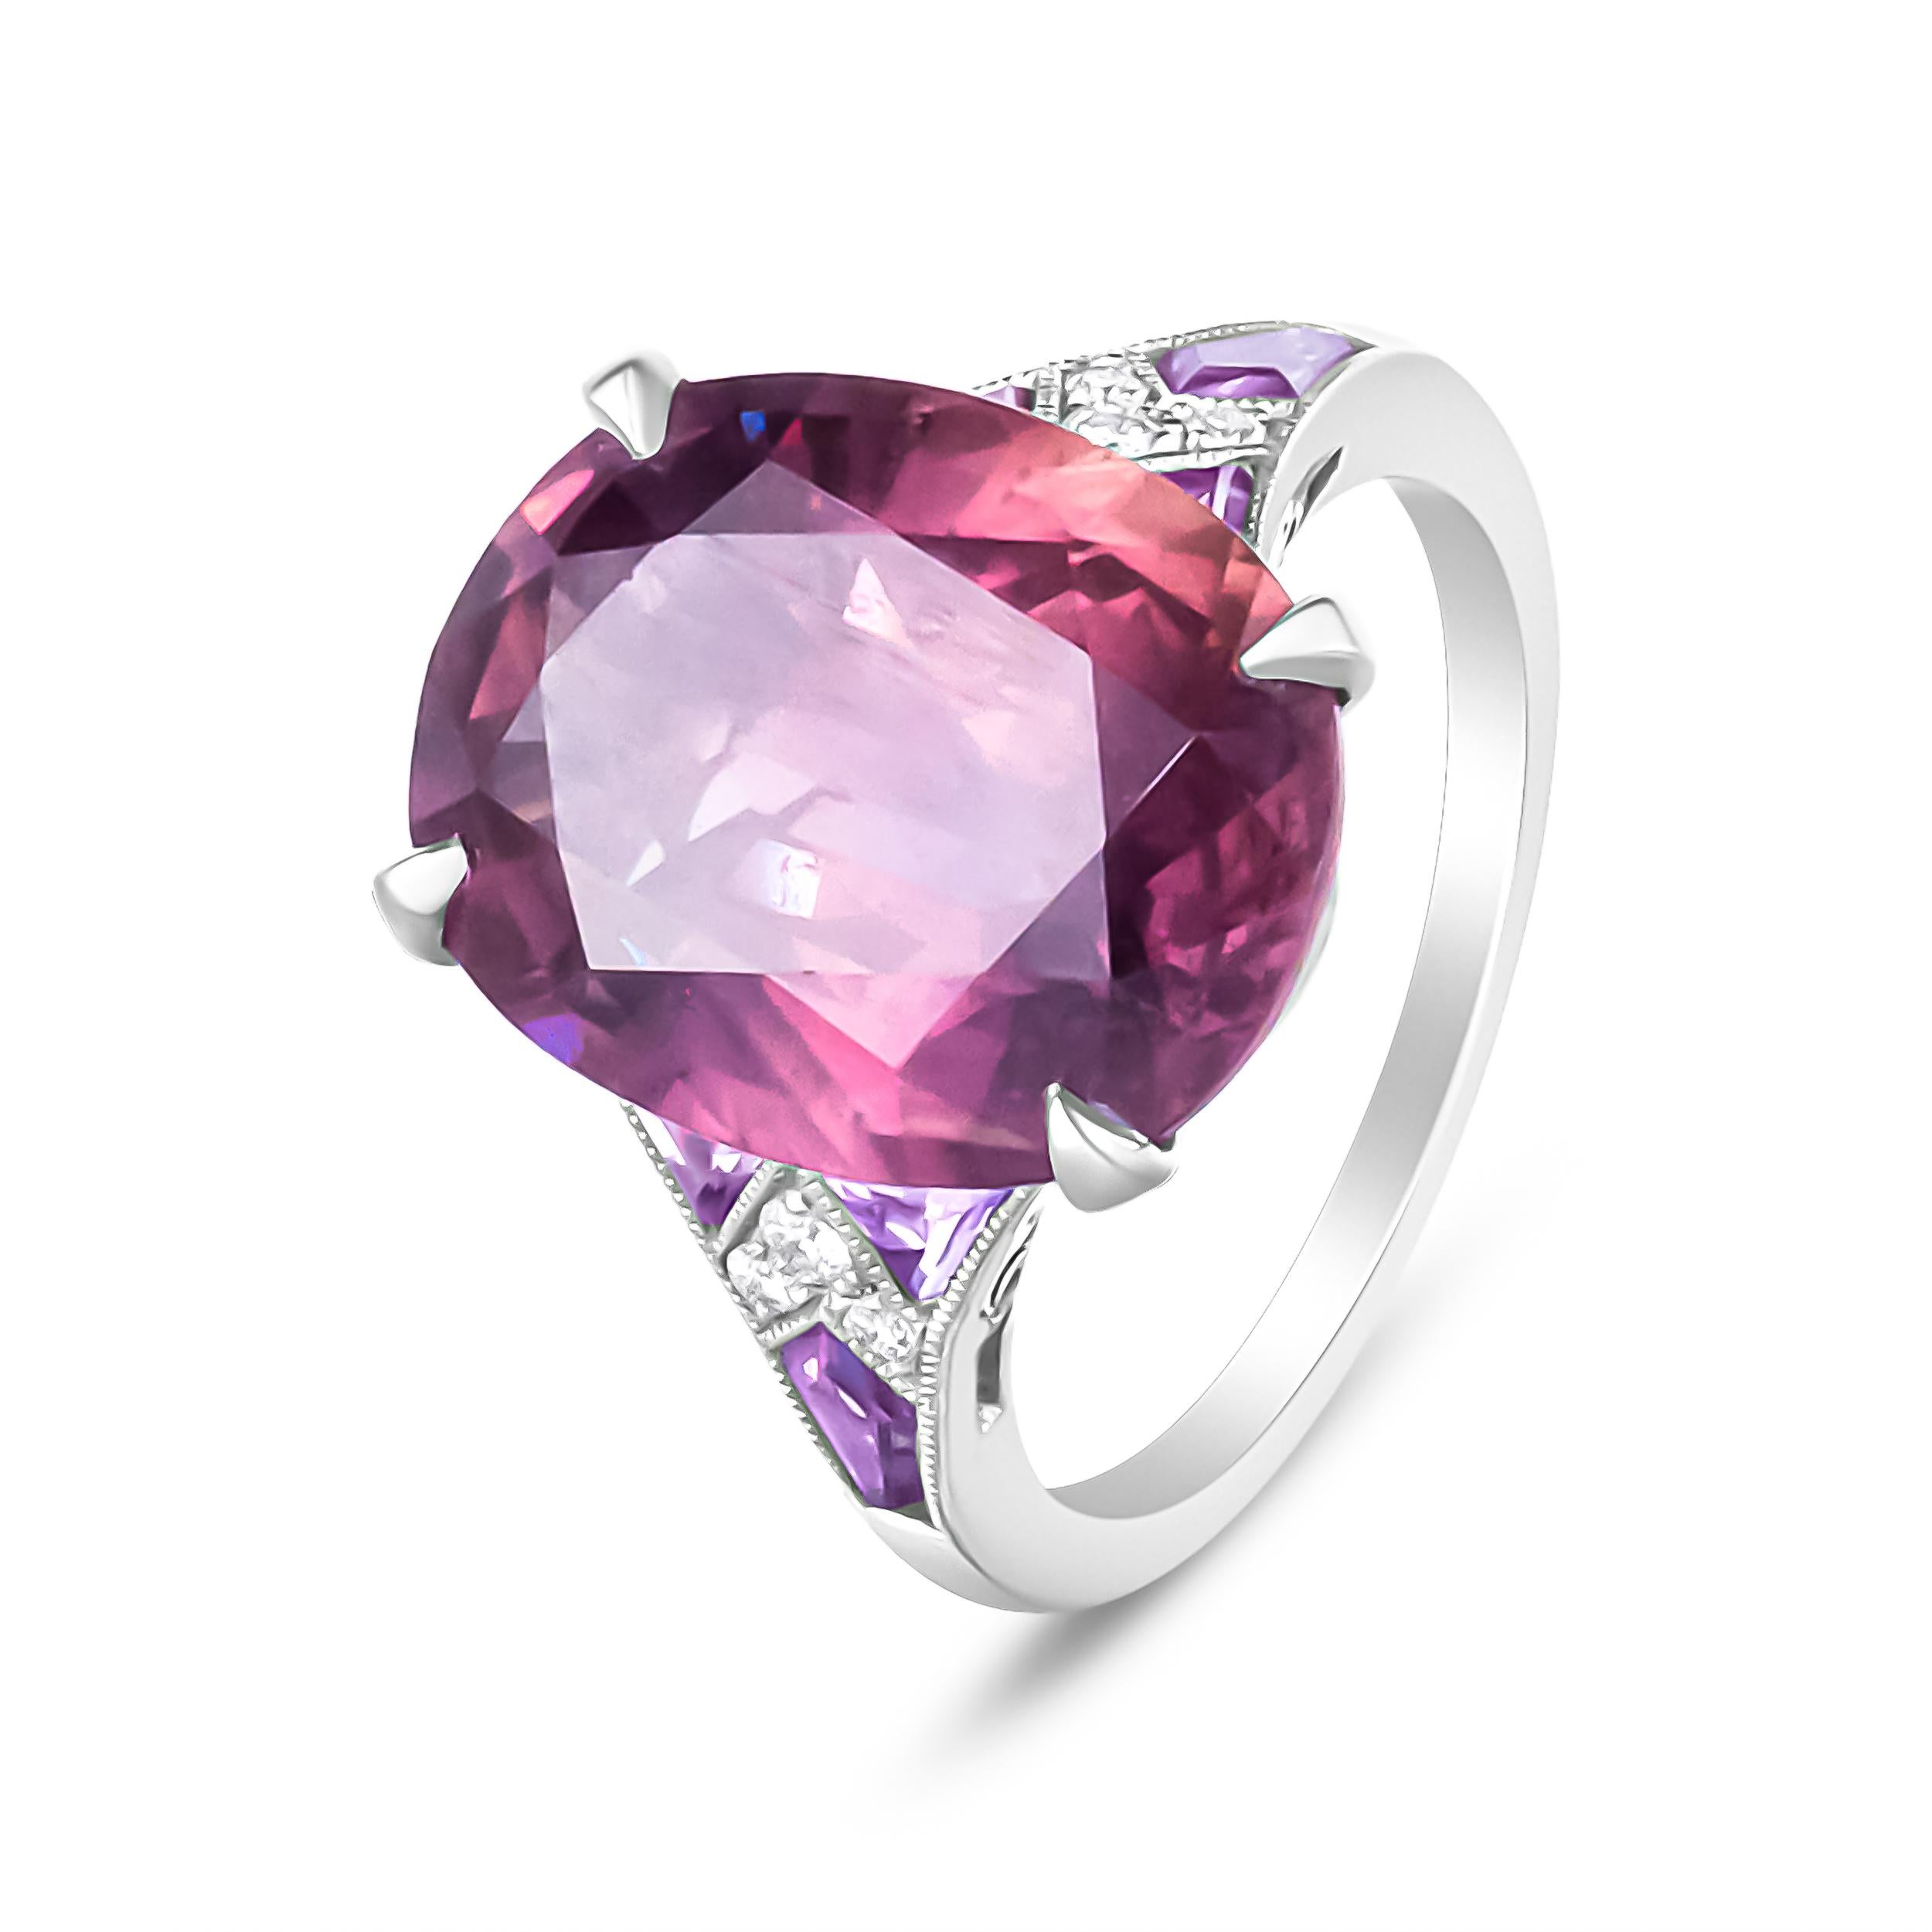 This dynamic cocktail ring featuring the blazing brilliance of a 10 1/2 carat cushion cut purple sapphire in a 4-prong setting, with stunning facets to glorify its sparkling nature. Accent diamonds uplift the glamour of this ring at an approximate